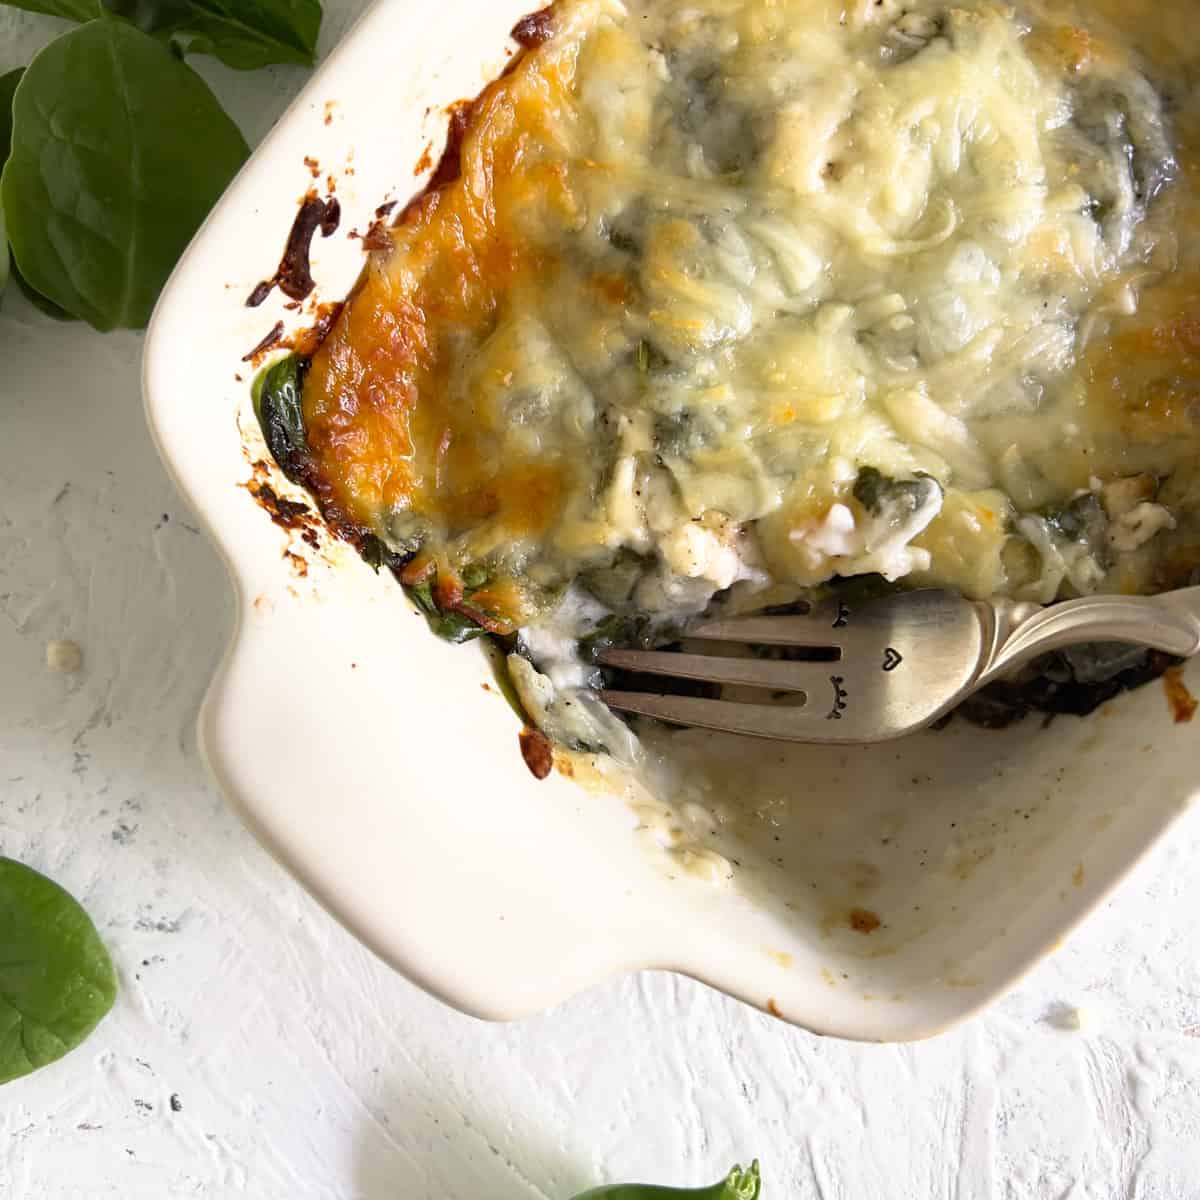 Mini spinach casserole in white baking dish with fork bite taken out.